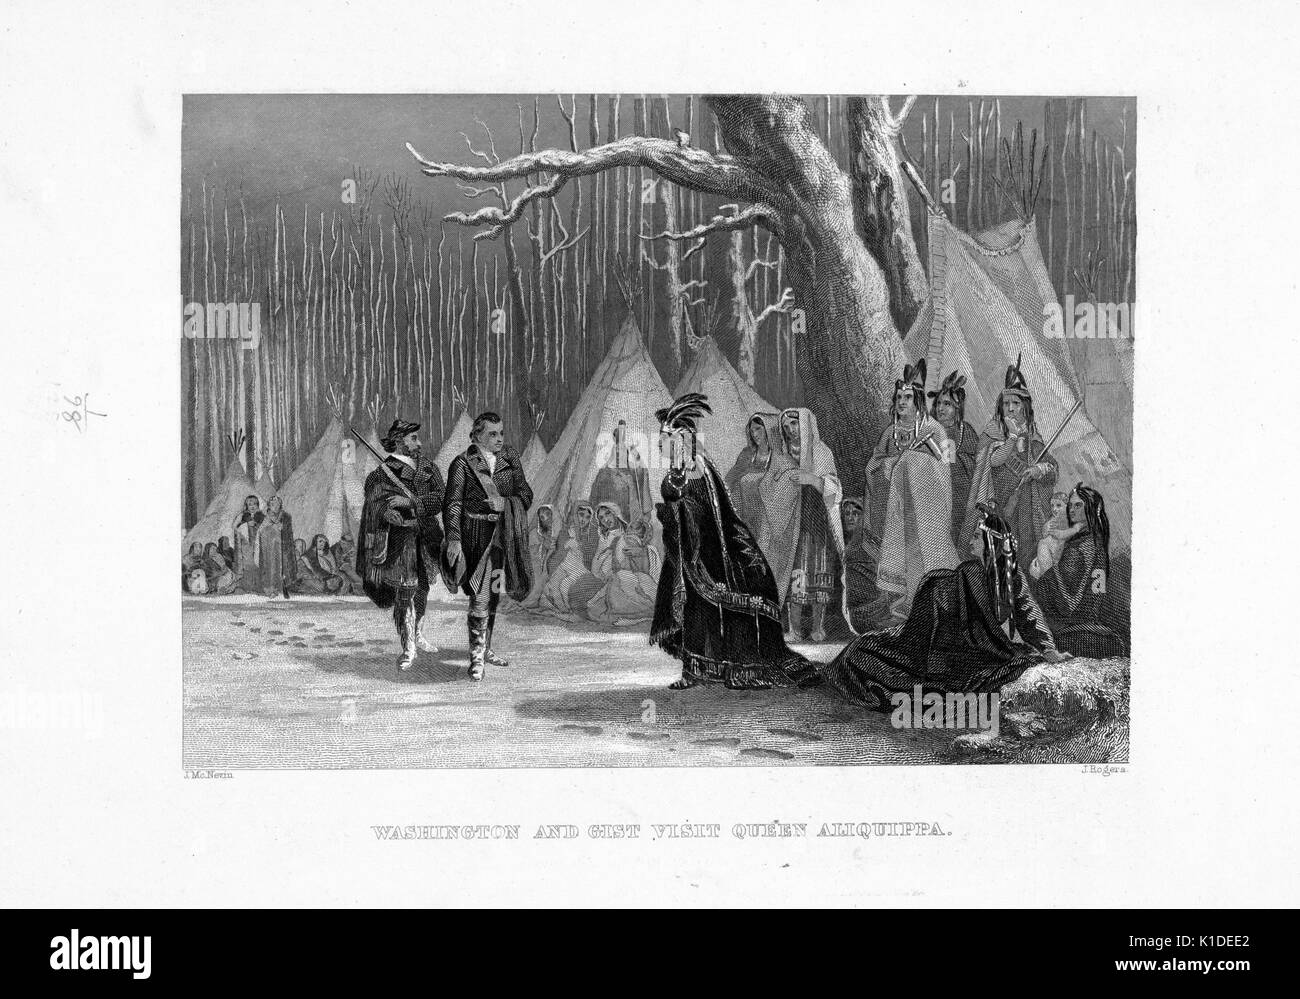 An engraving of George Washington and Christopher Gist meeting Queen Aliquippa, leader of the Seneca Tribe, in a Native American camp, situated in a forest clearing, Ohio, 1900. From the New York Public Library. Stock Photo